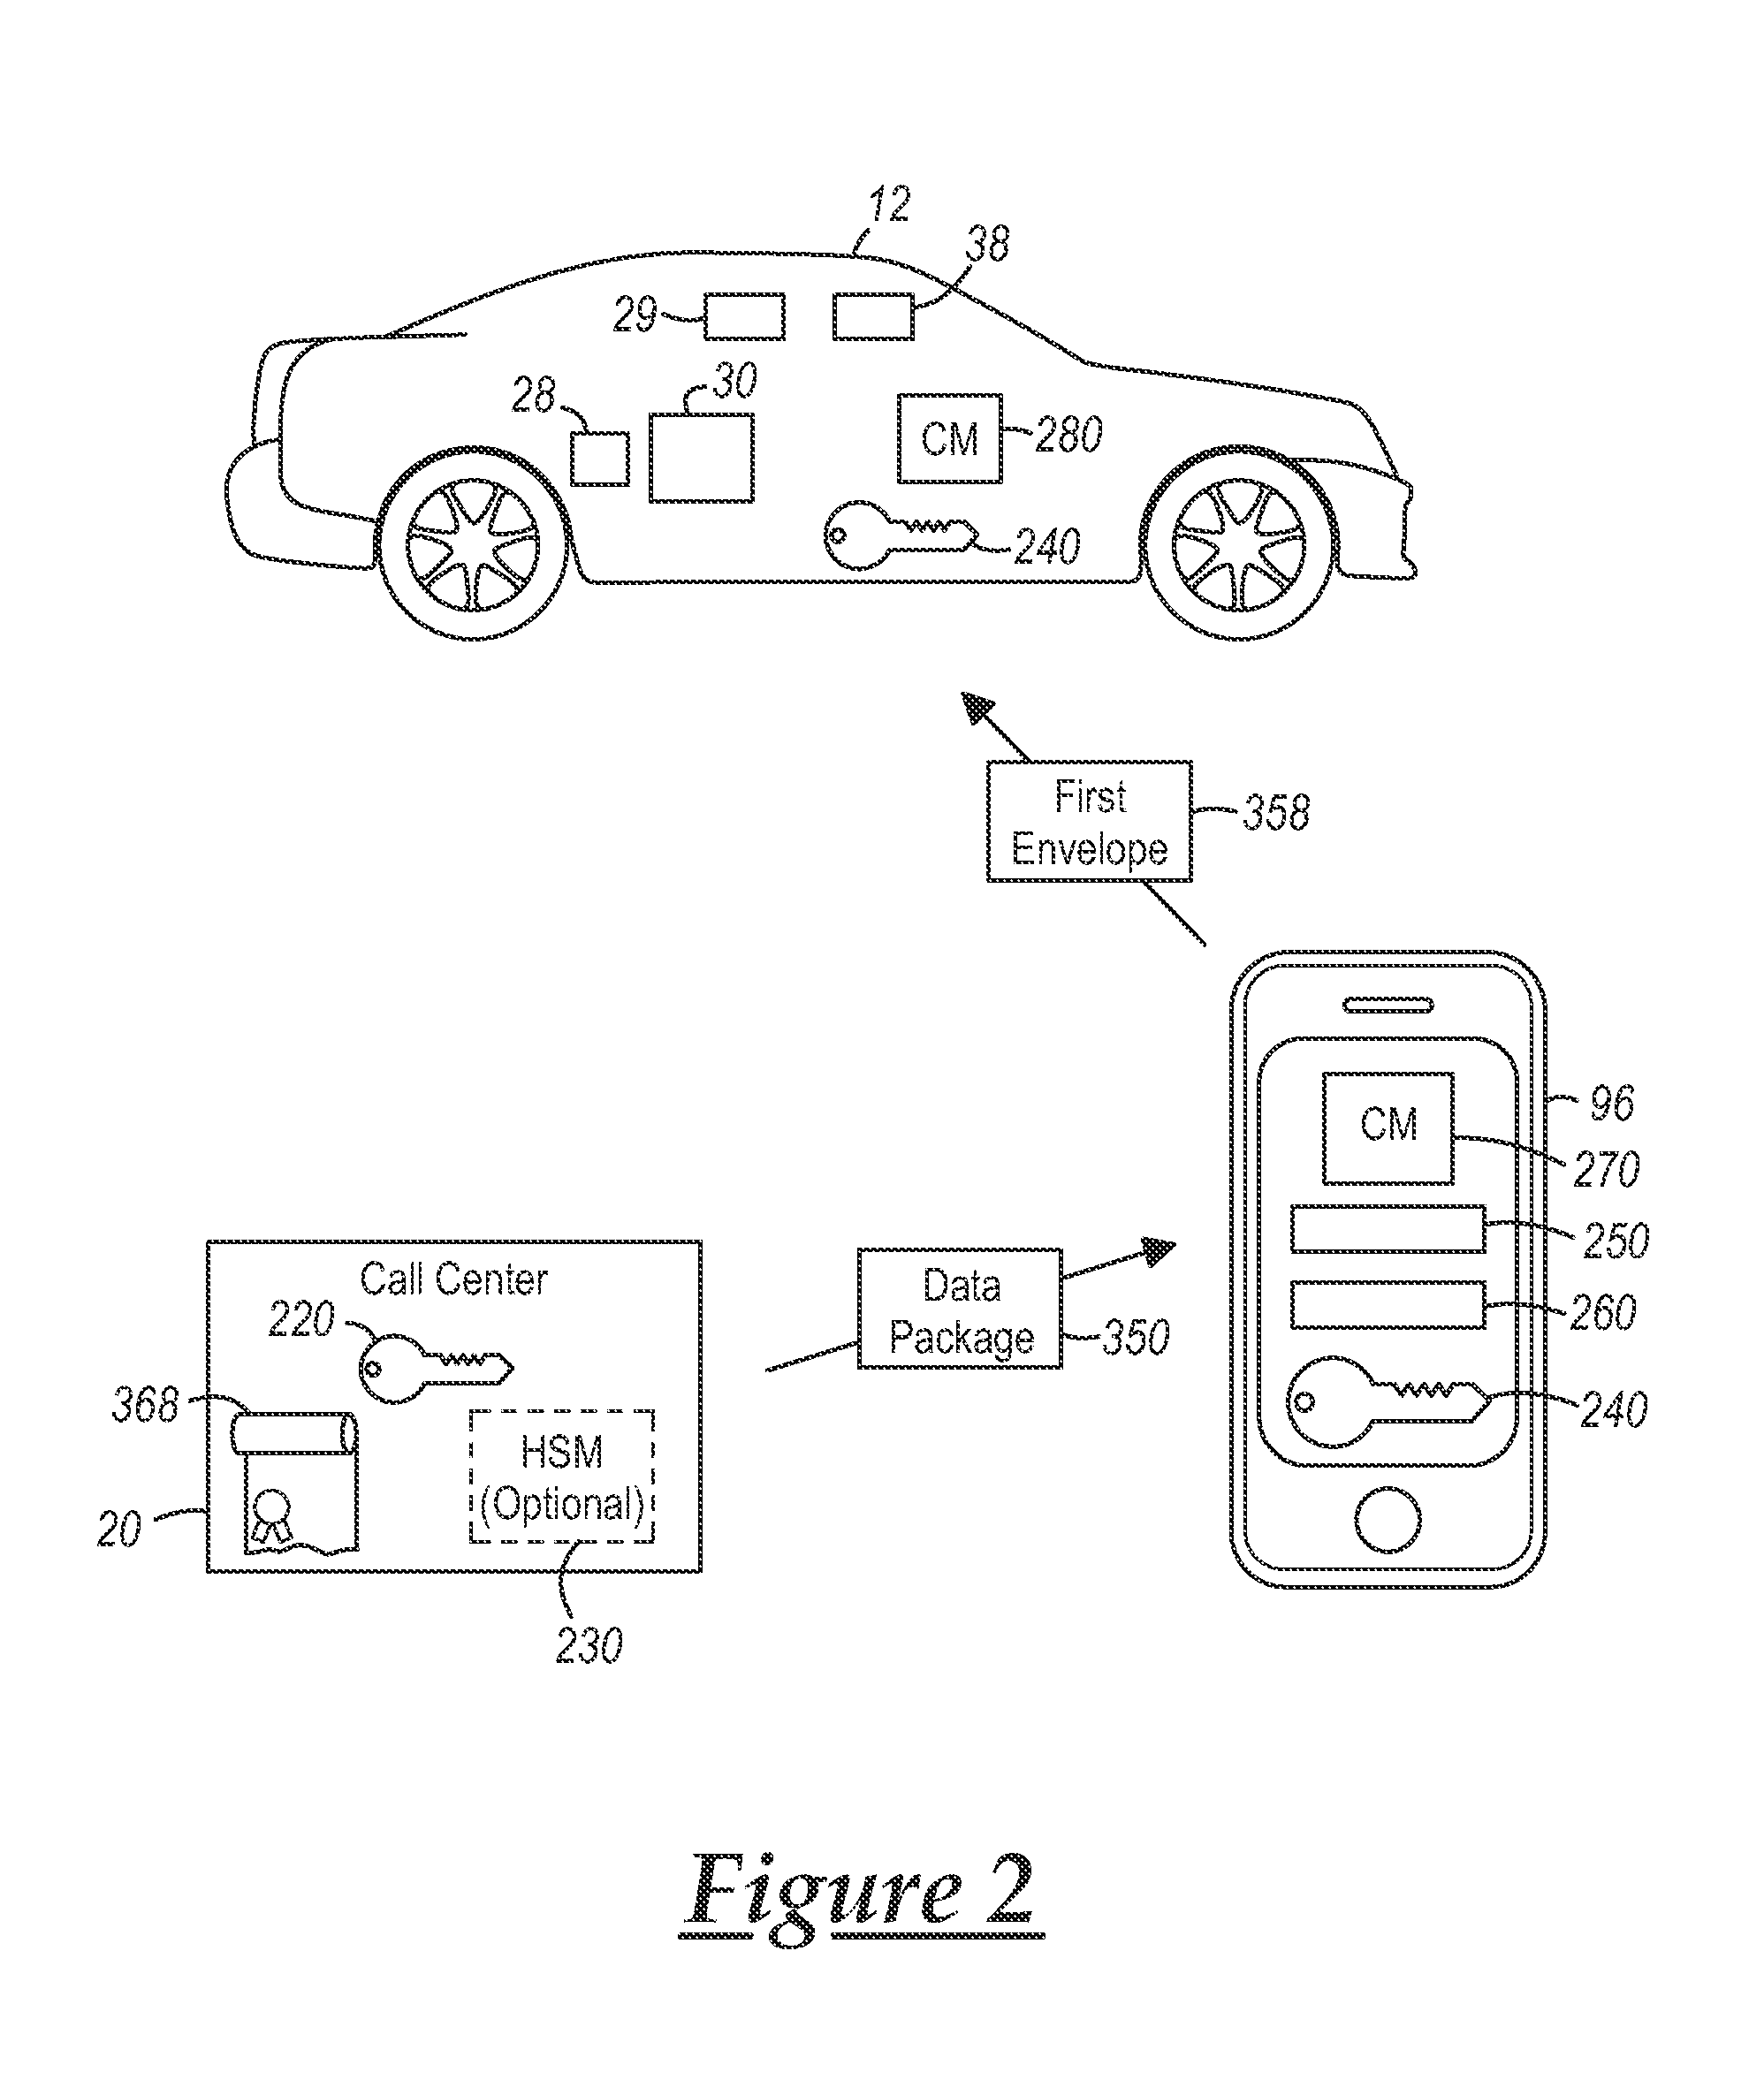 Fully authenticated content transmission from a provider to a recipient device via an intermediary device